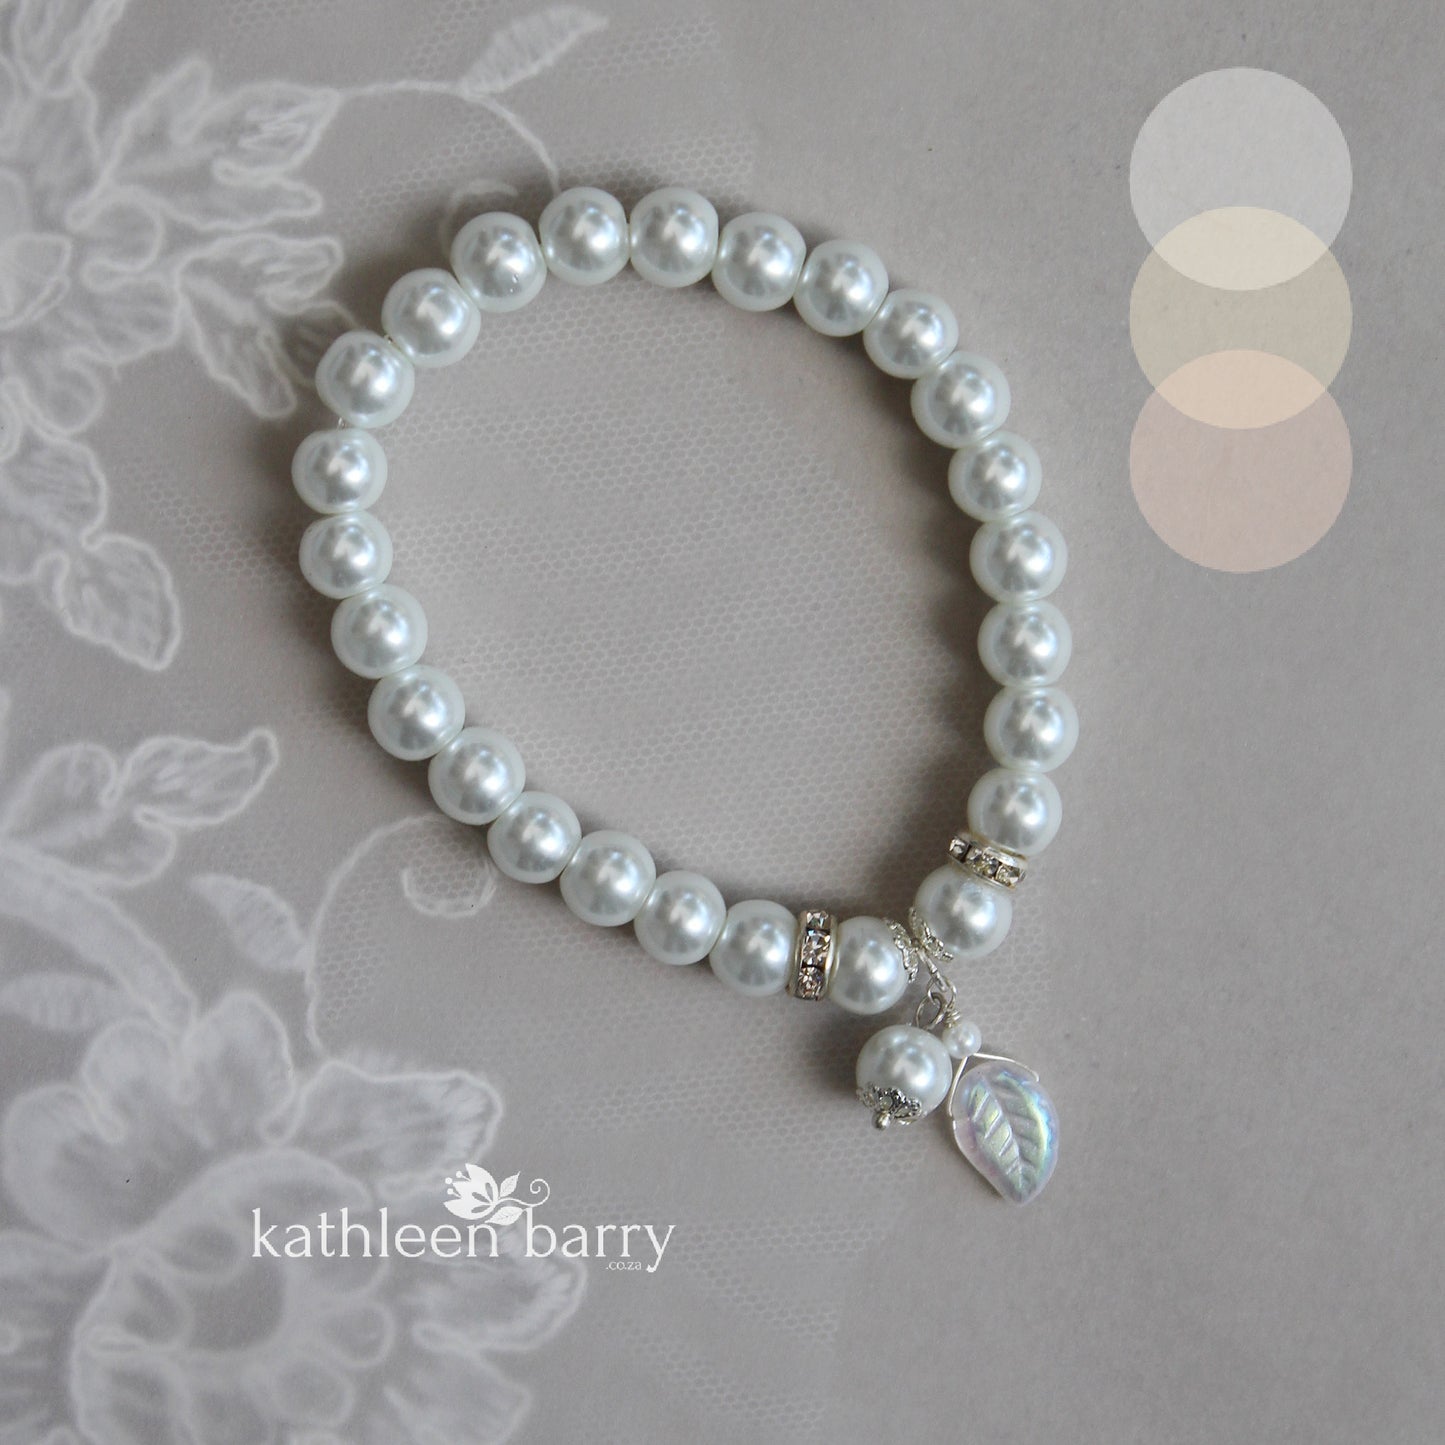 Silver and pearl bracelets Bride or Bridesmaid gift available in White, Ivory/cream or blush pink